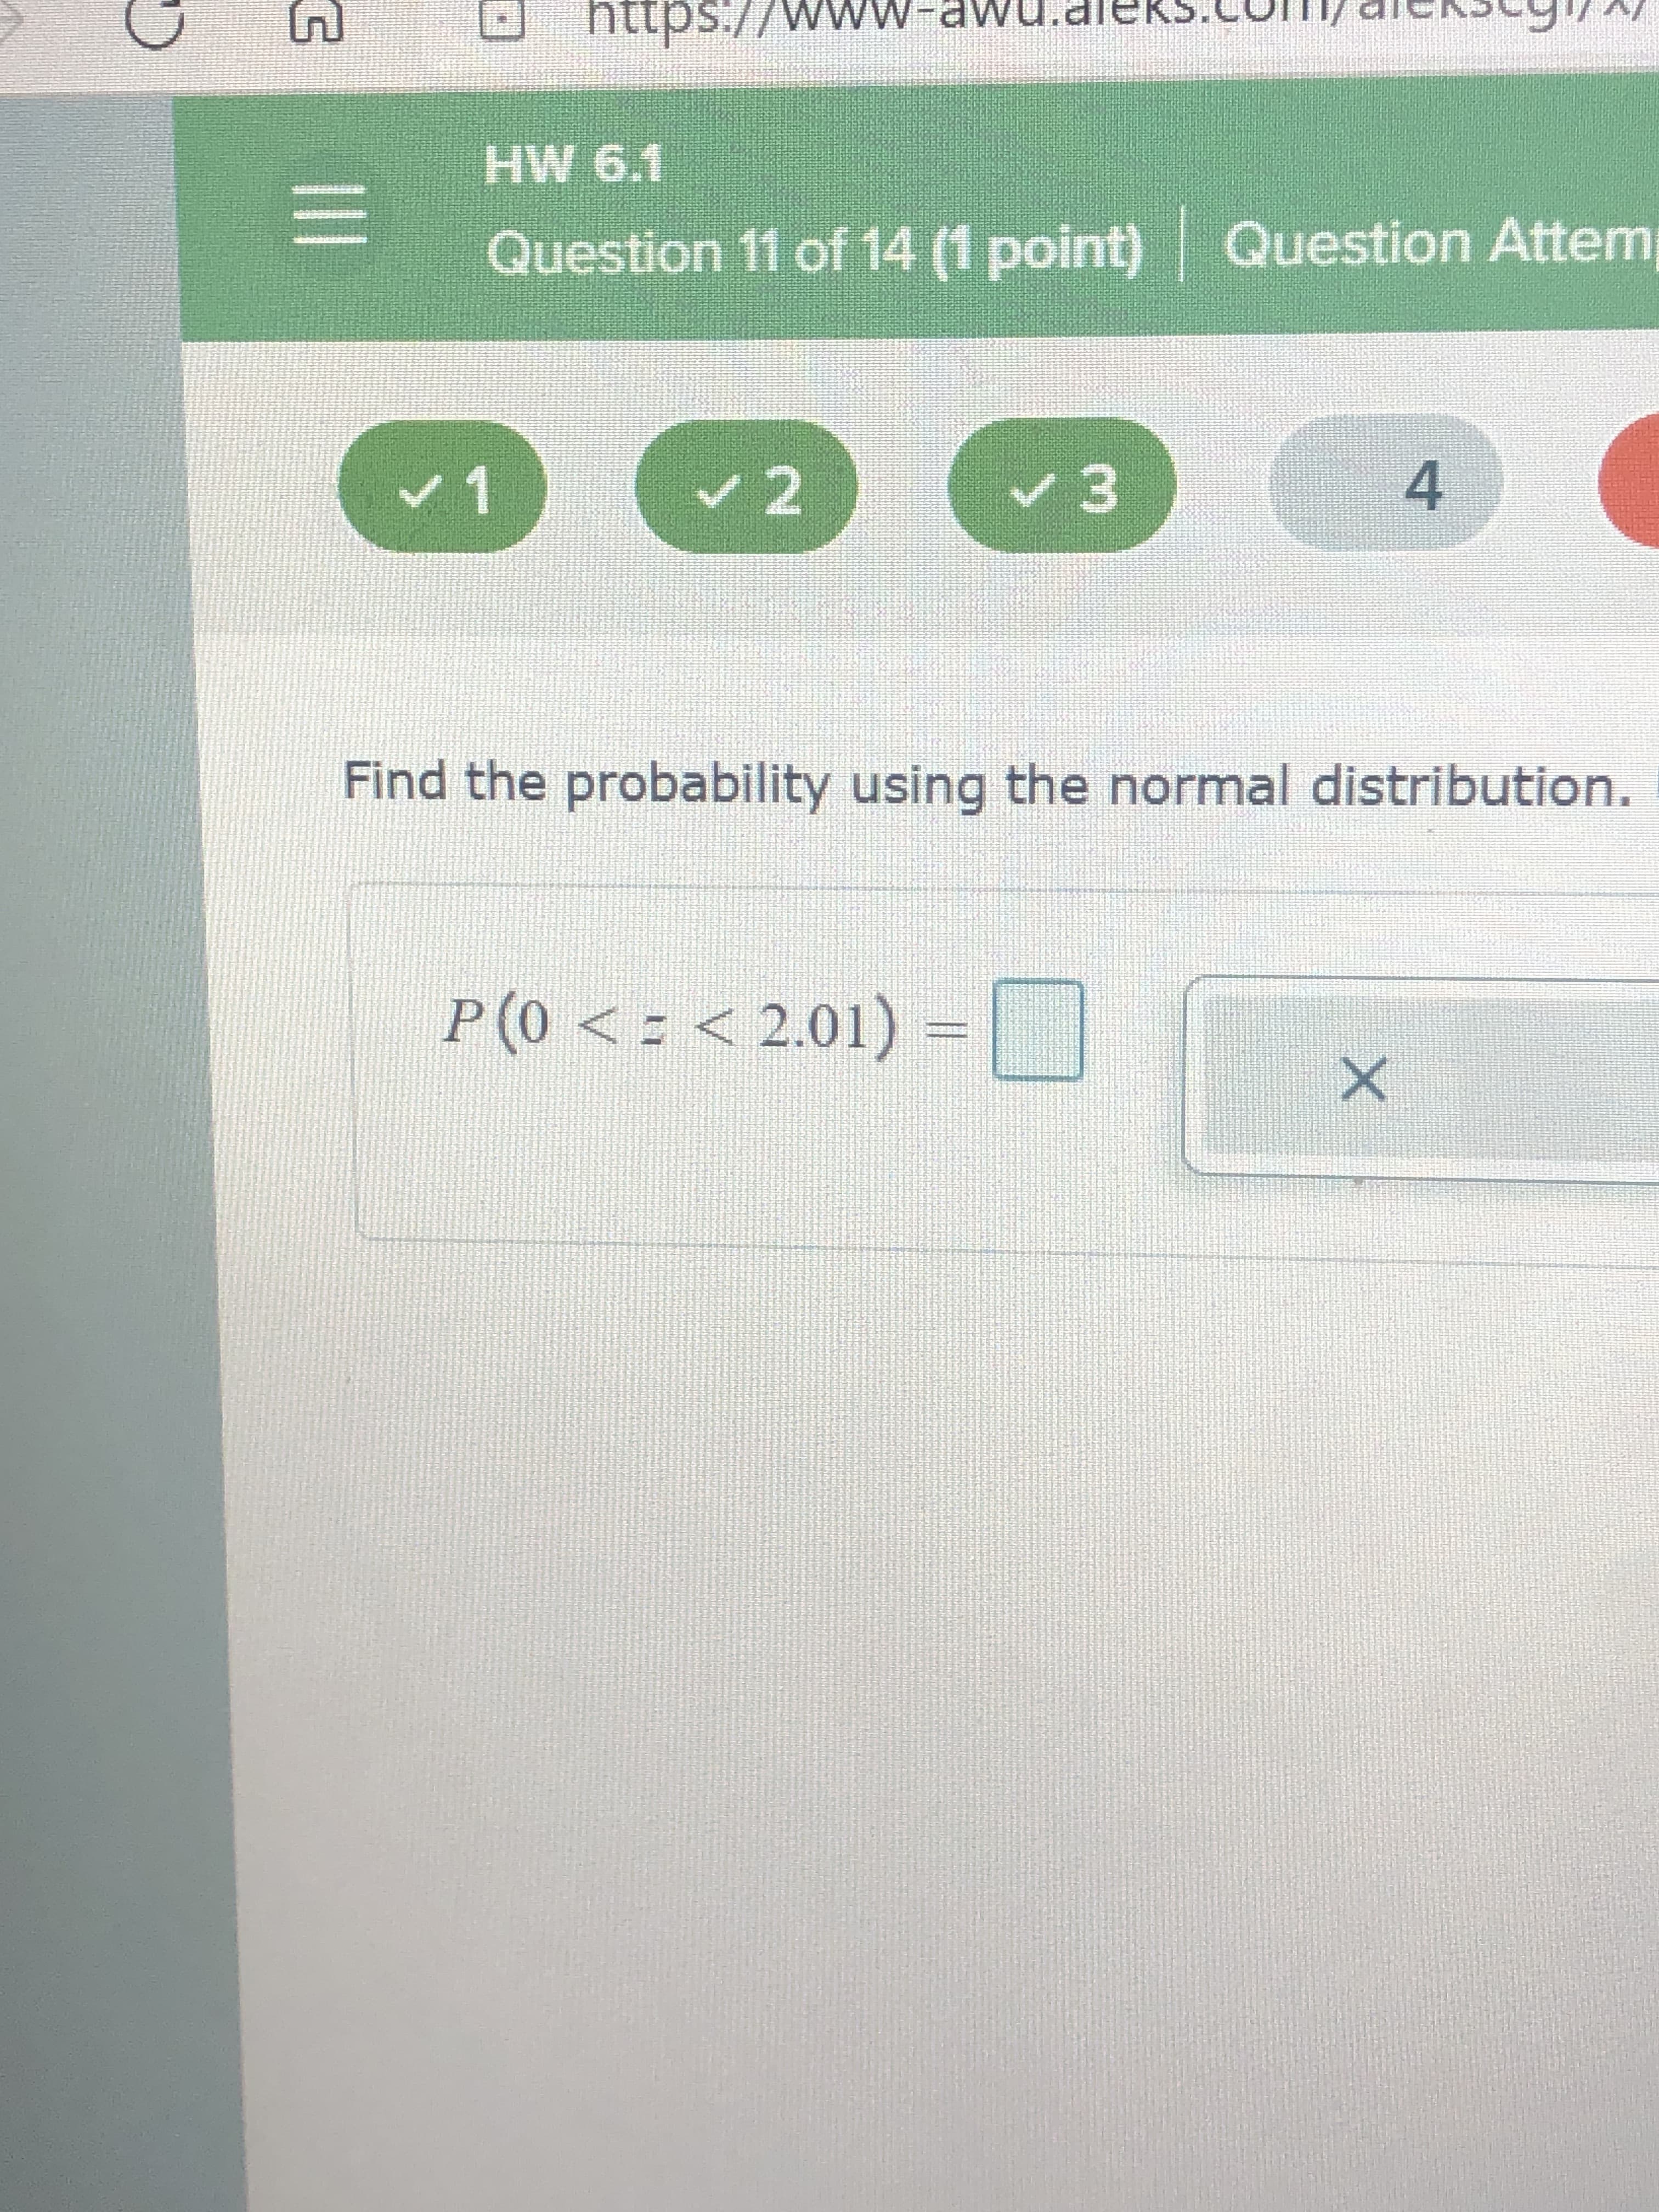 Find the probability using the normal distribution.
P (0 <= < 2.01)
